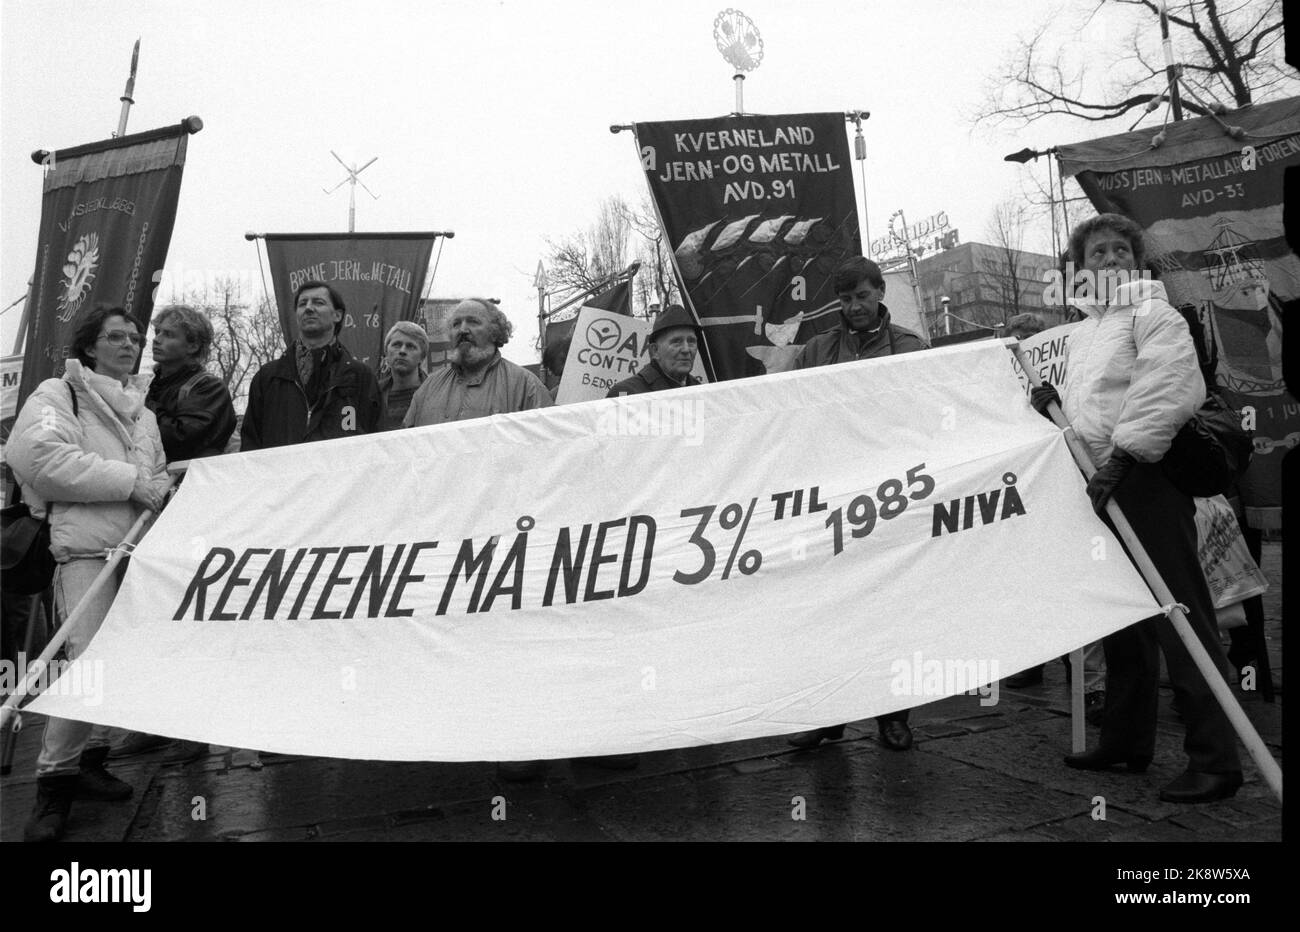 Oslo 19880215. The interest rate reaction, demonstration to the high interest rate level. 150 trade unions and clubs from all over the country were represented in a demonstration against the high interest rates. NTB Stock Photo Eystein Hanssen / NTB Stock Photo